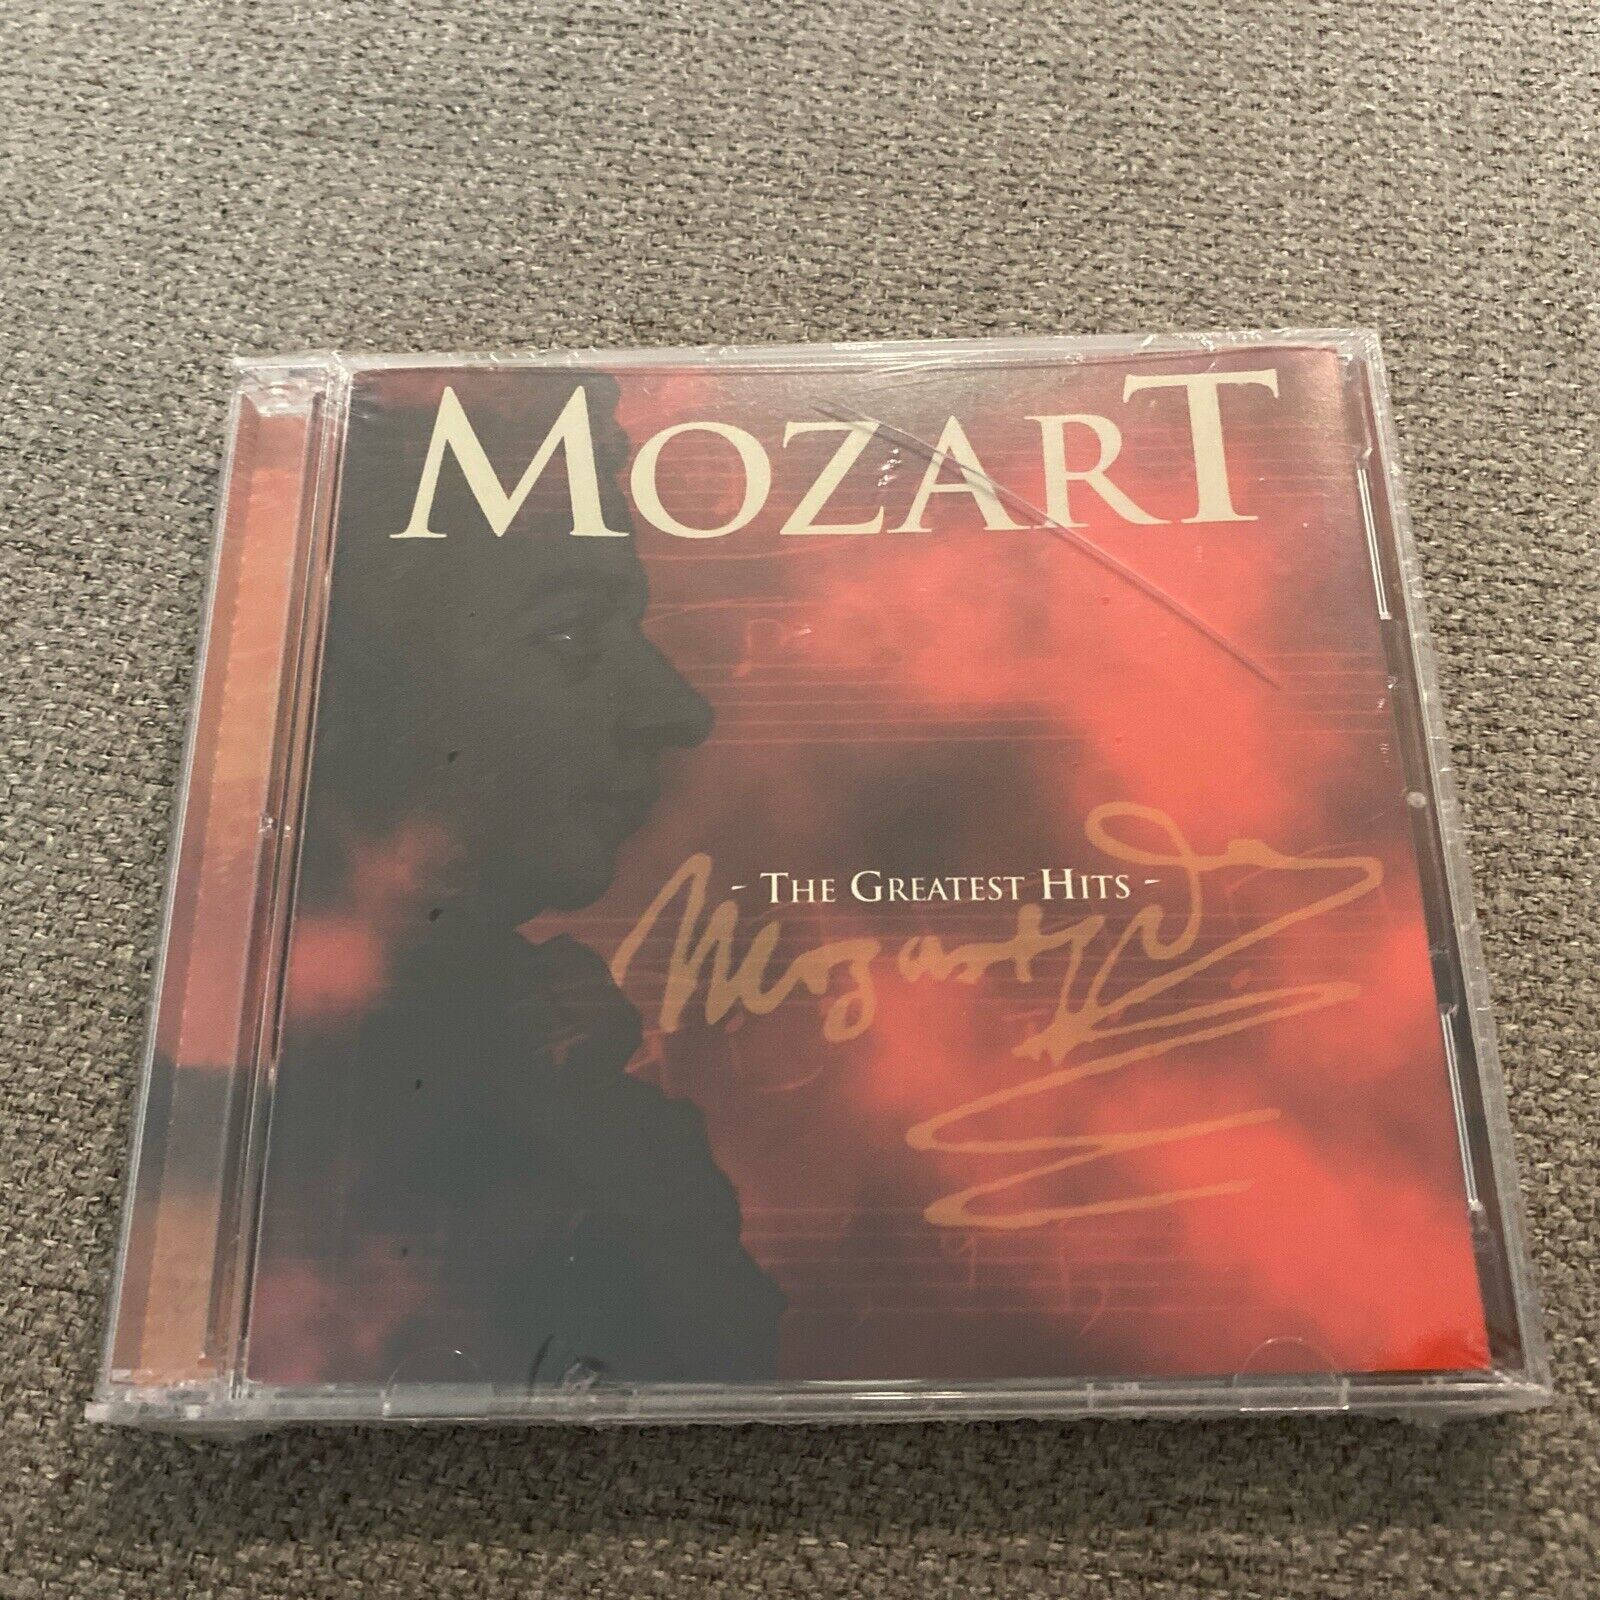 Mozart: The Greatest Hits by Various (CD, 2002)